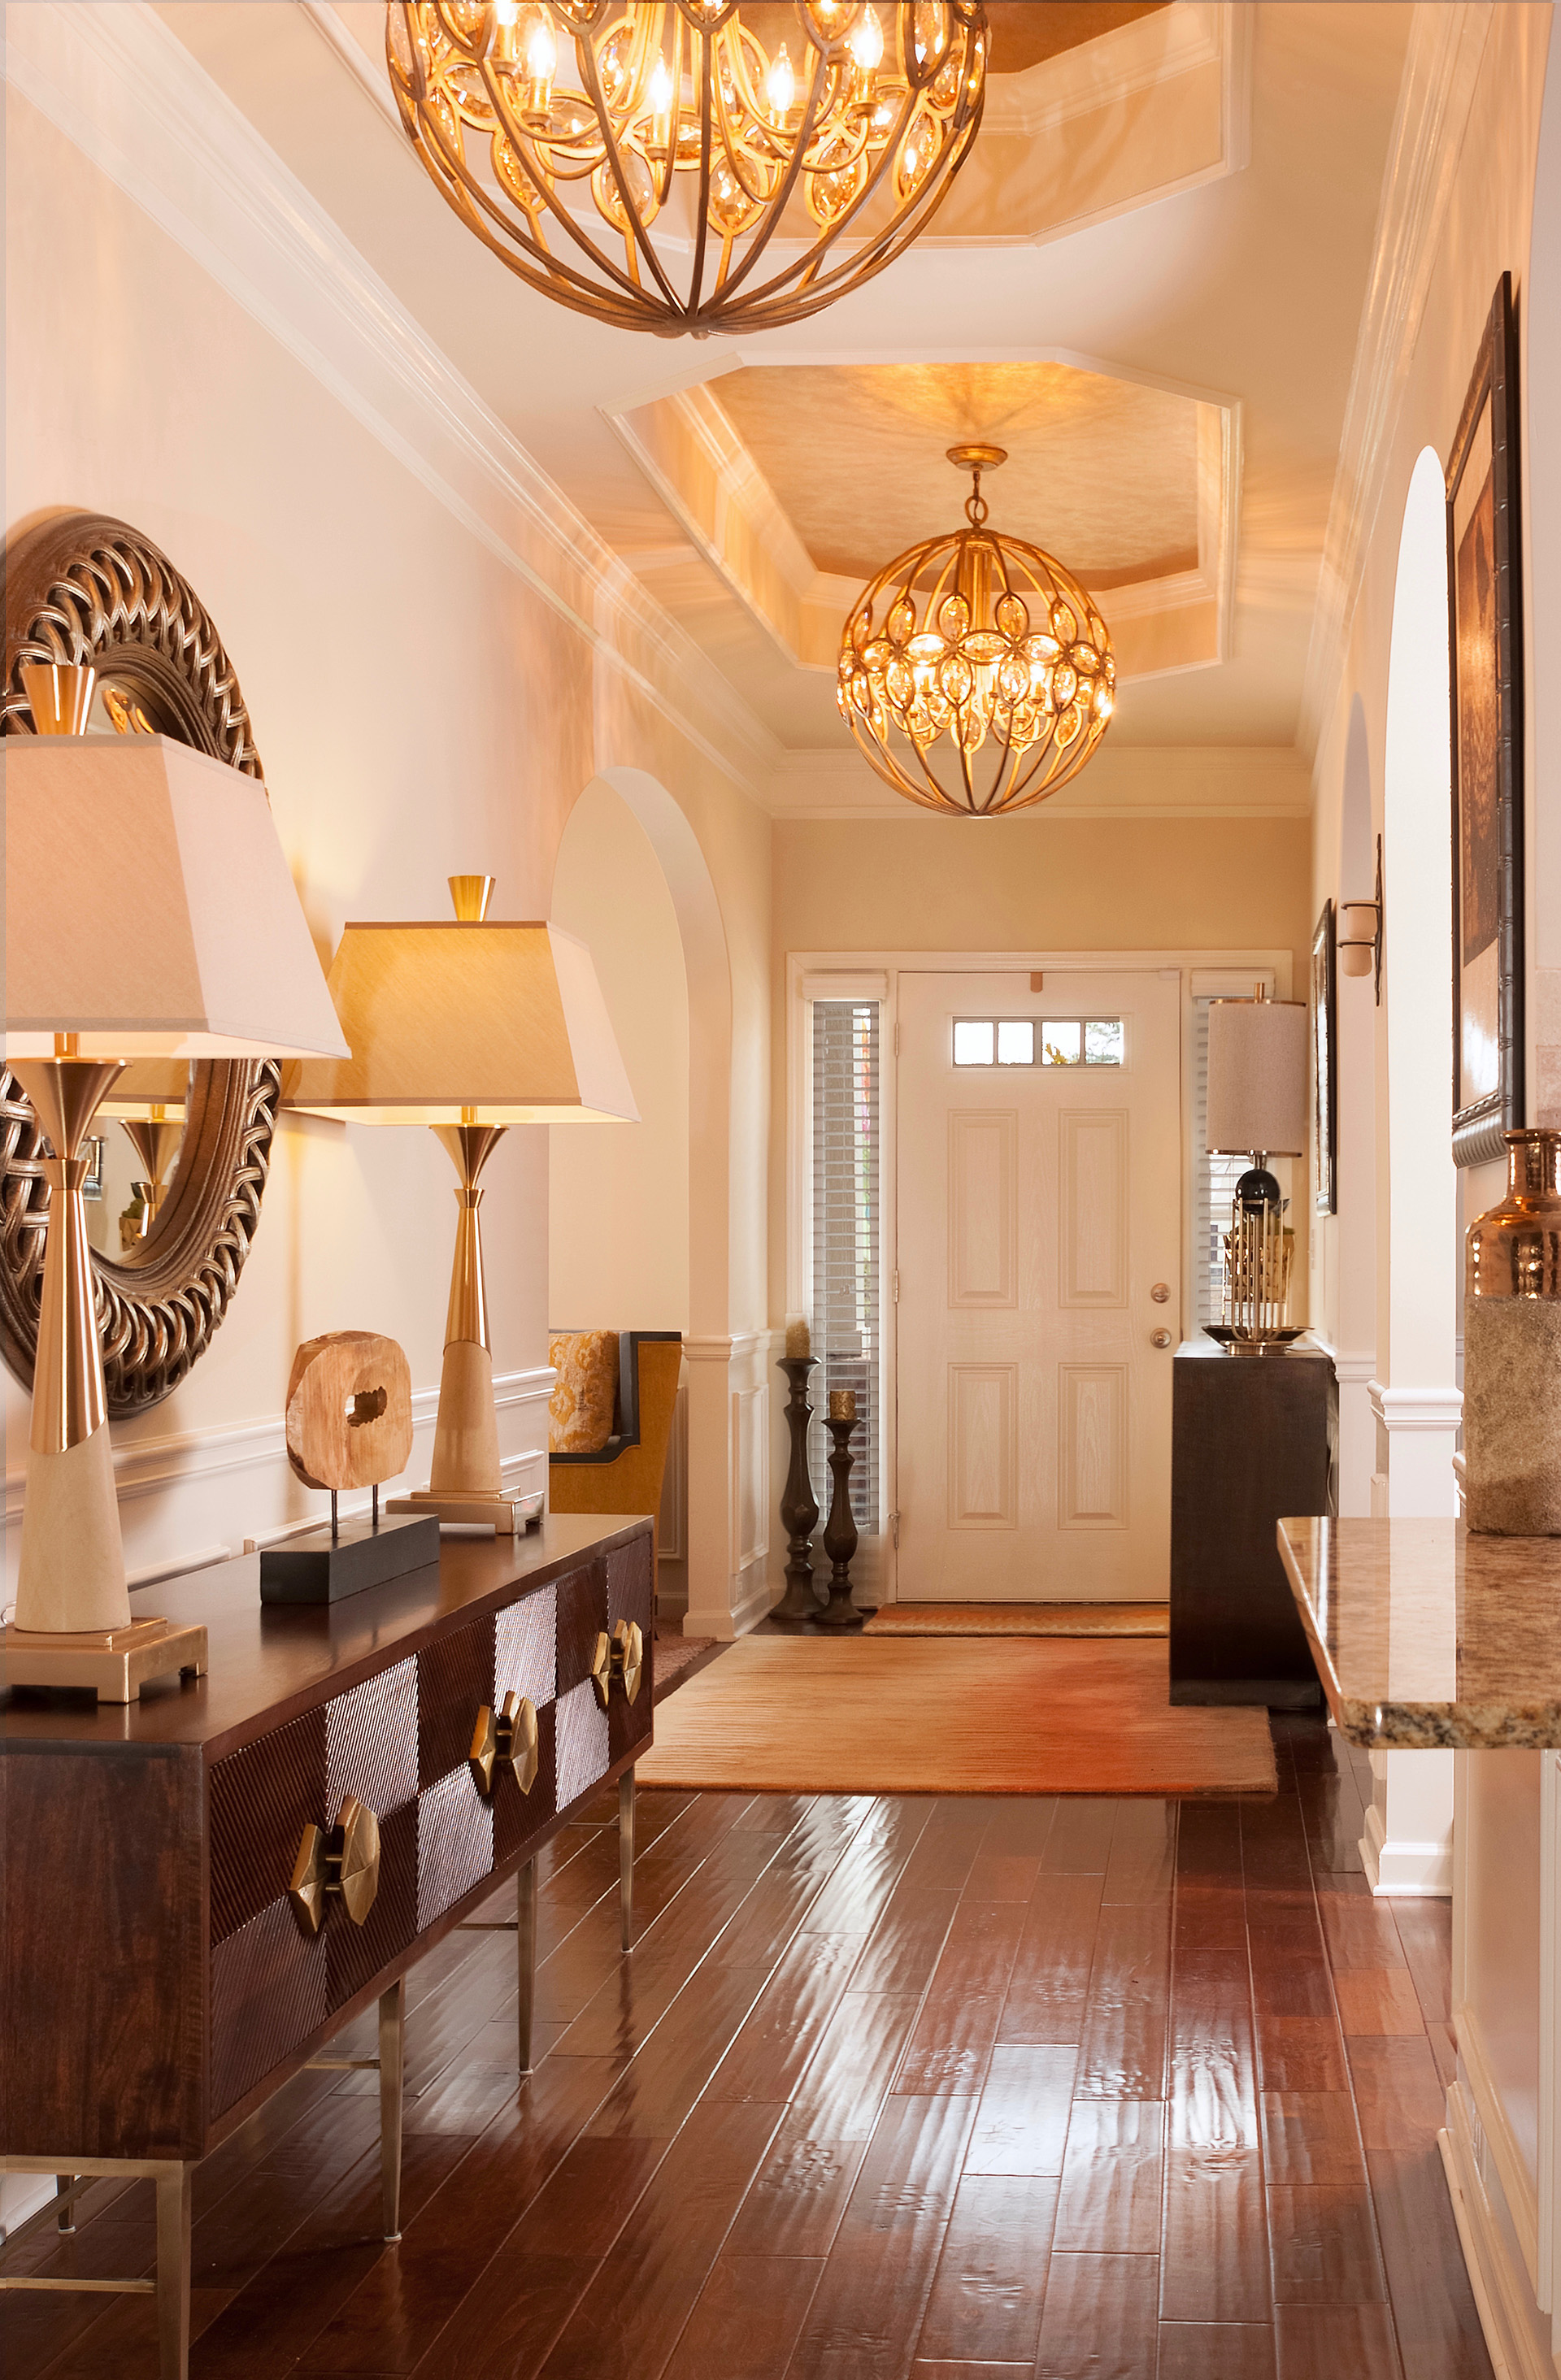 Elegant Foyer with Upscale Furnishings and Gold Accents